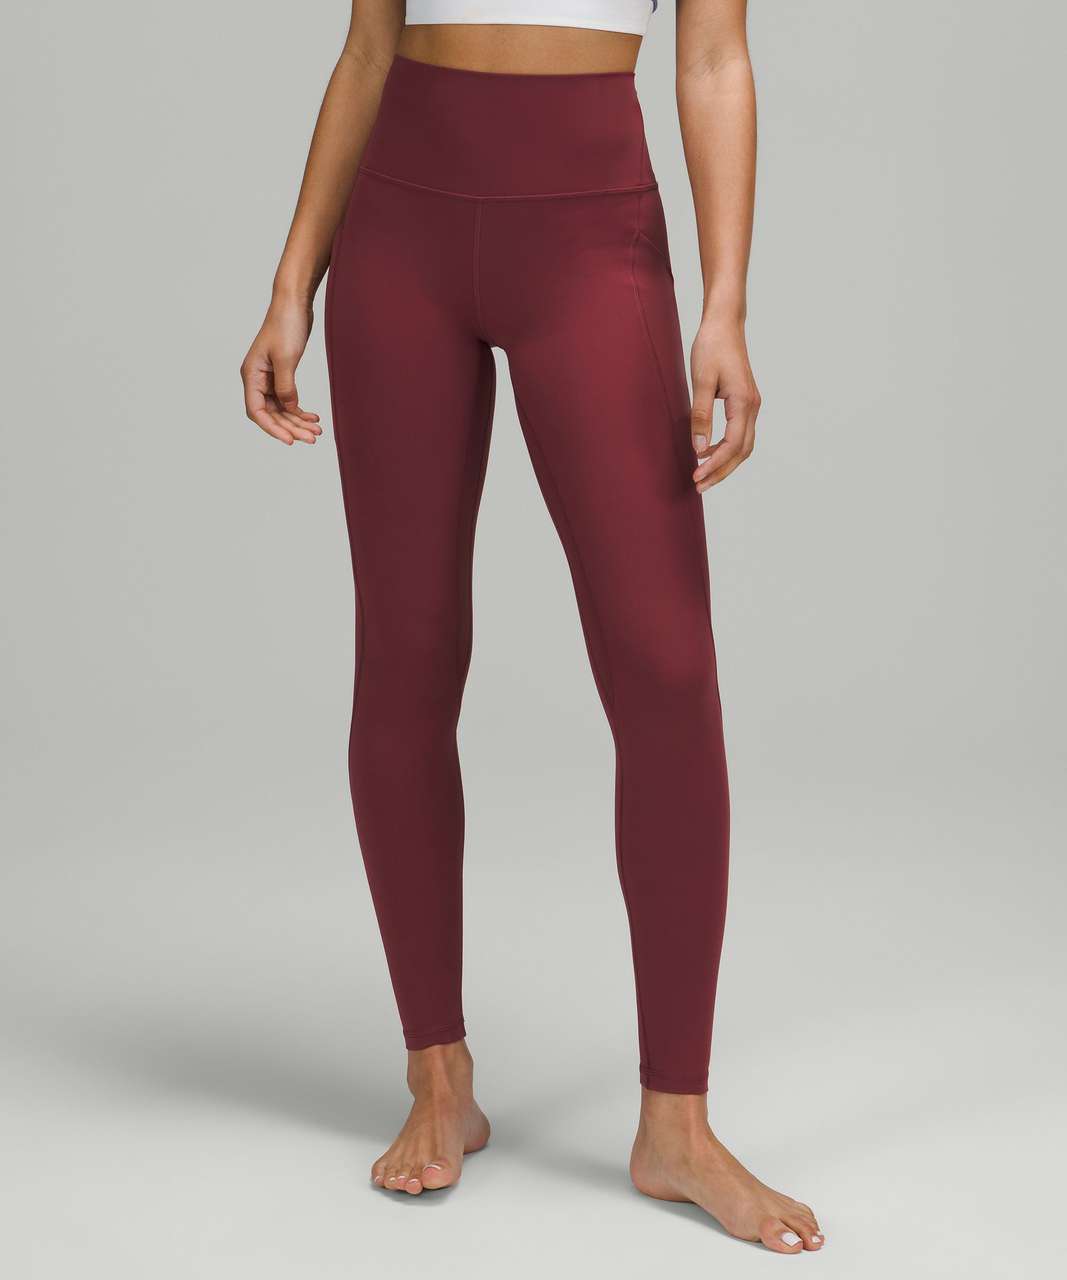 Lululemon Align High-Rise Pant with Pockets 28" - Mulled Wine